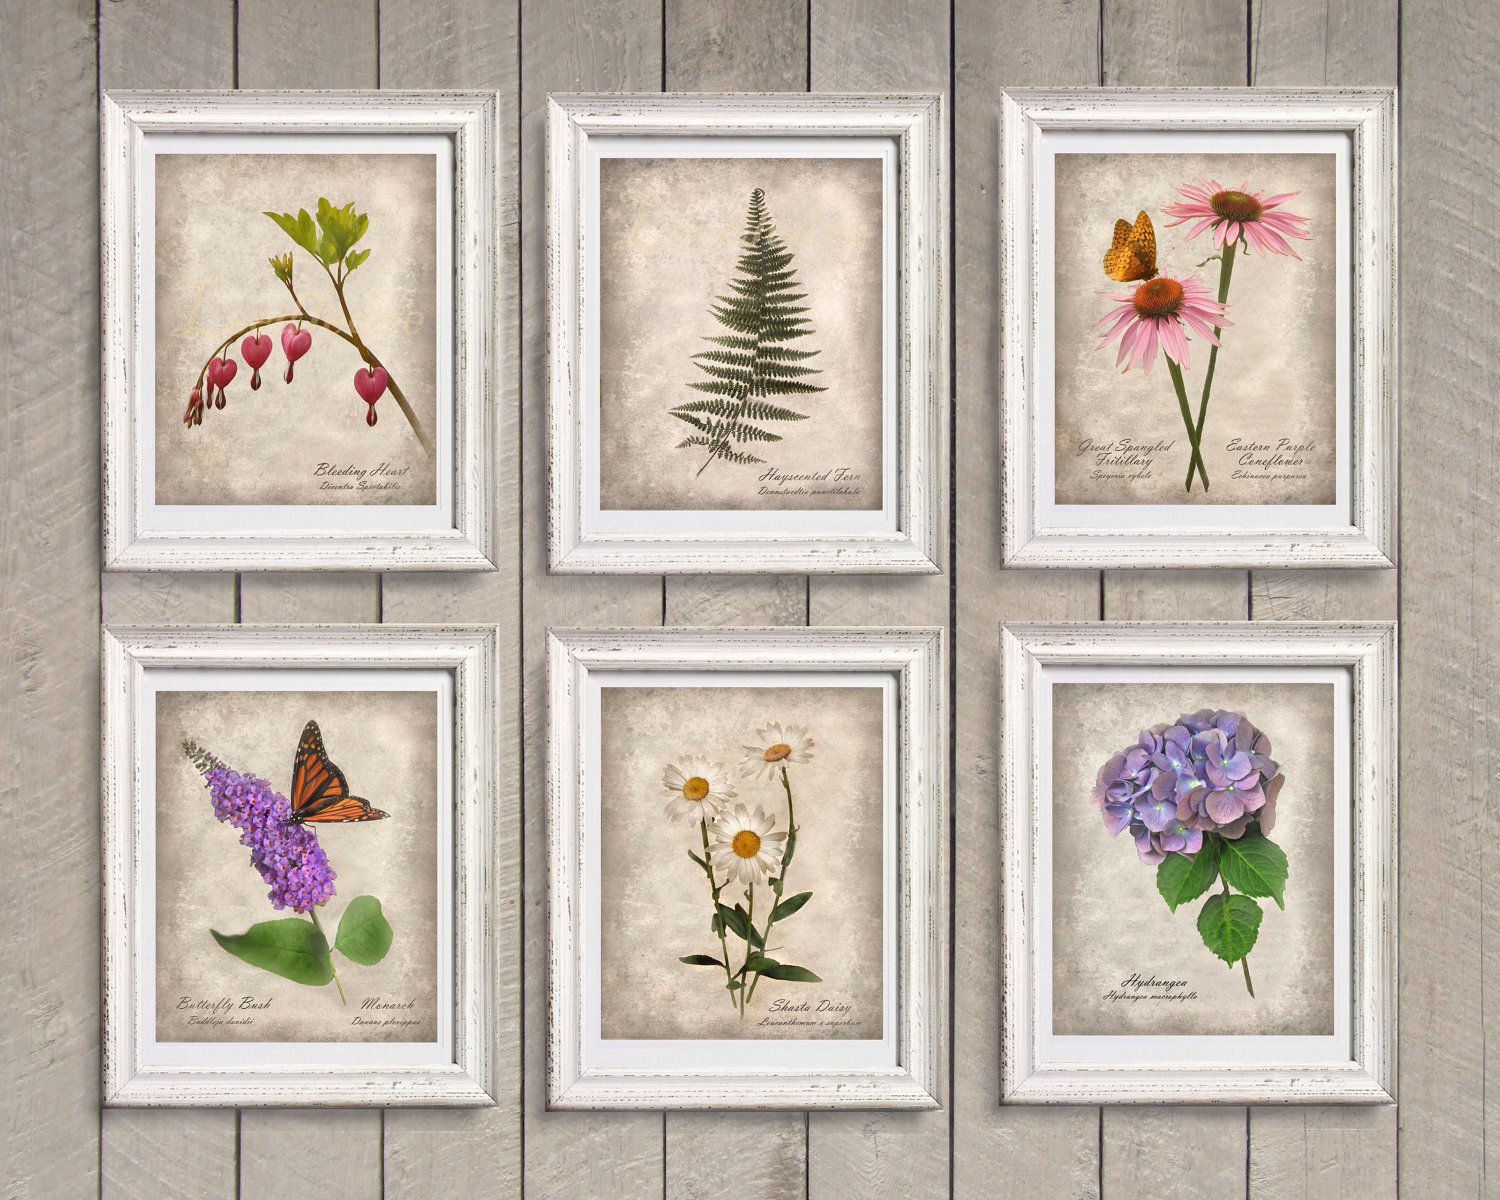 Botanical Artwork Display Coming To The College Lexleader